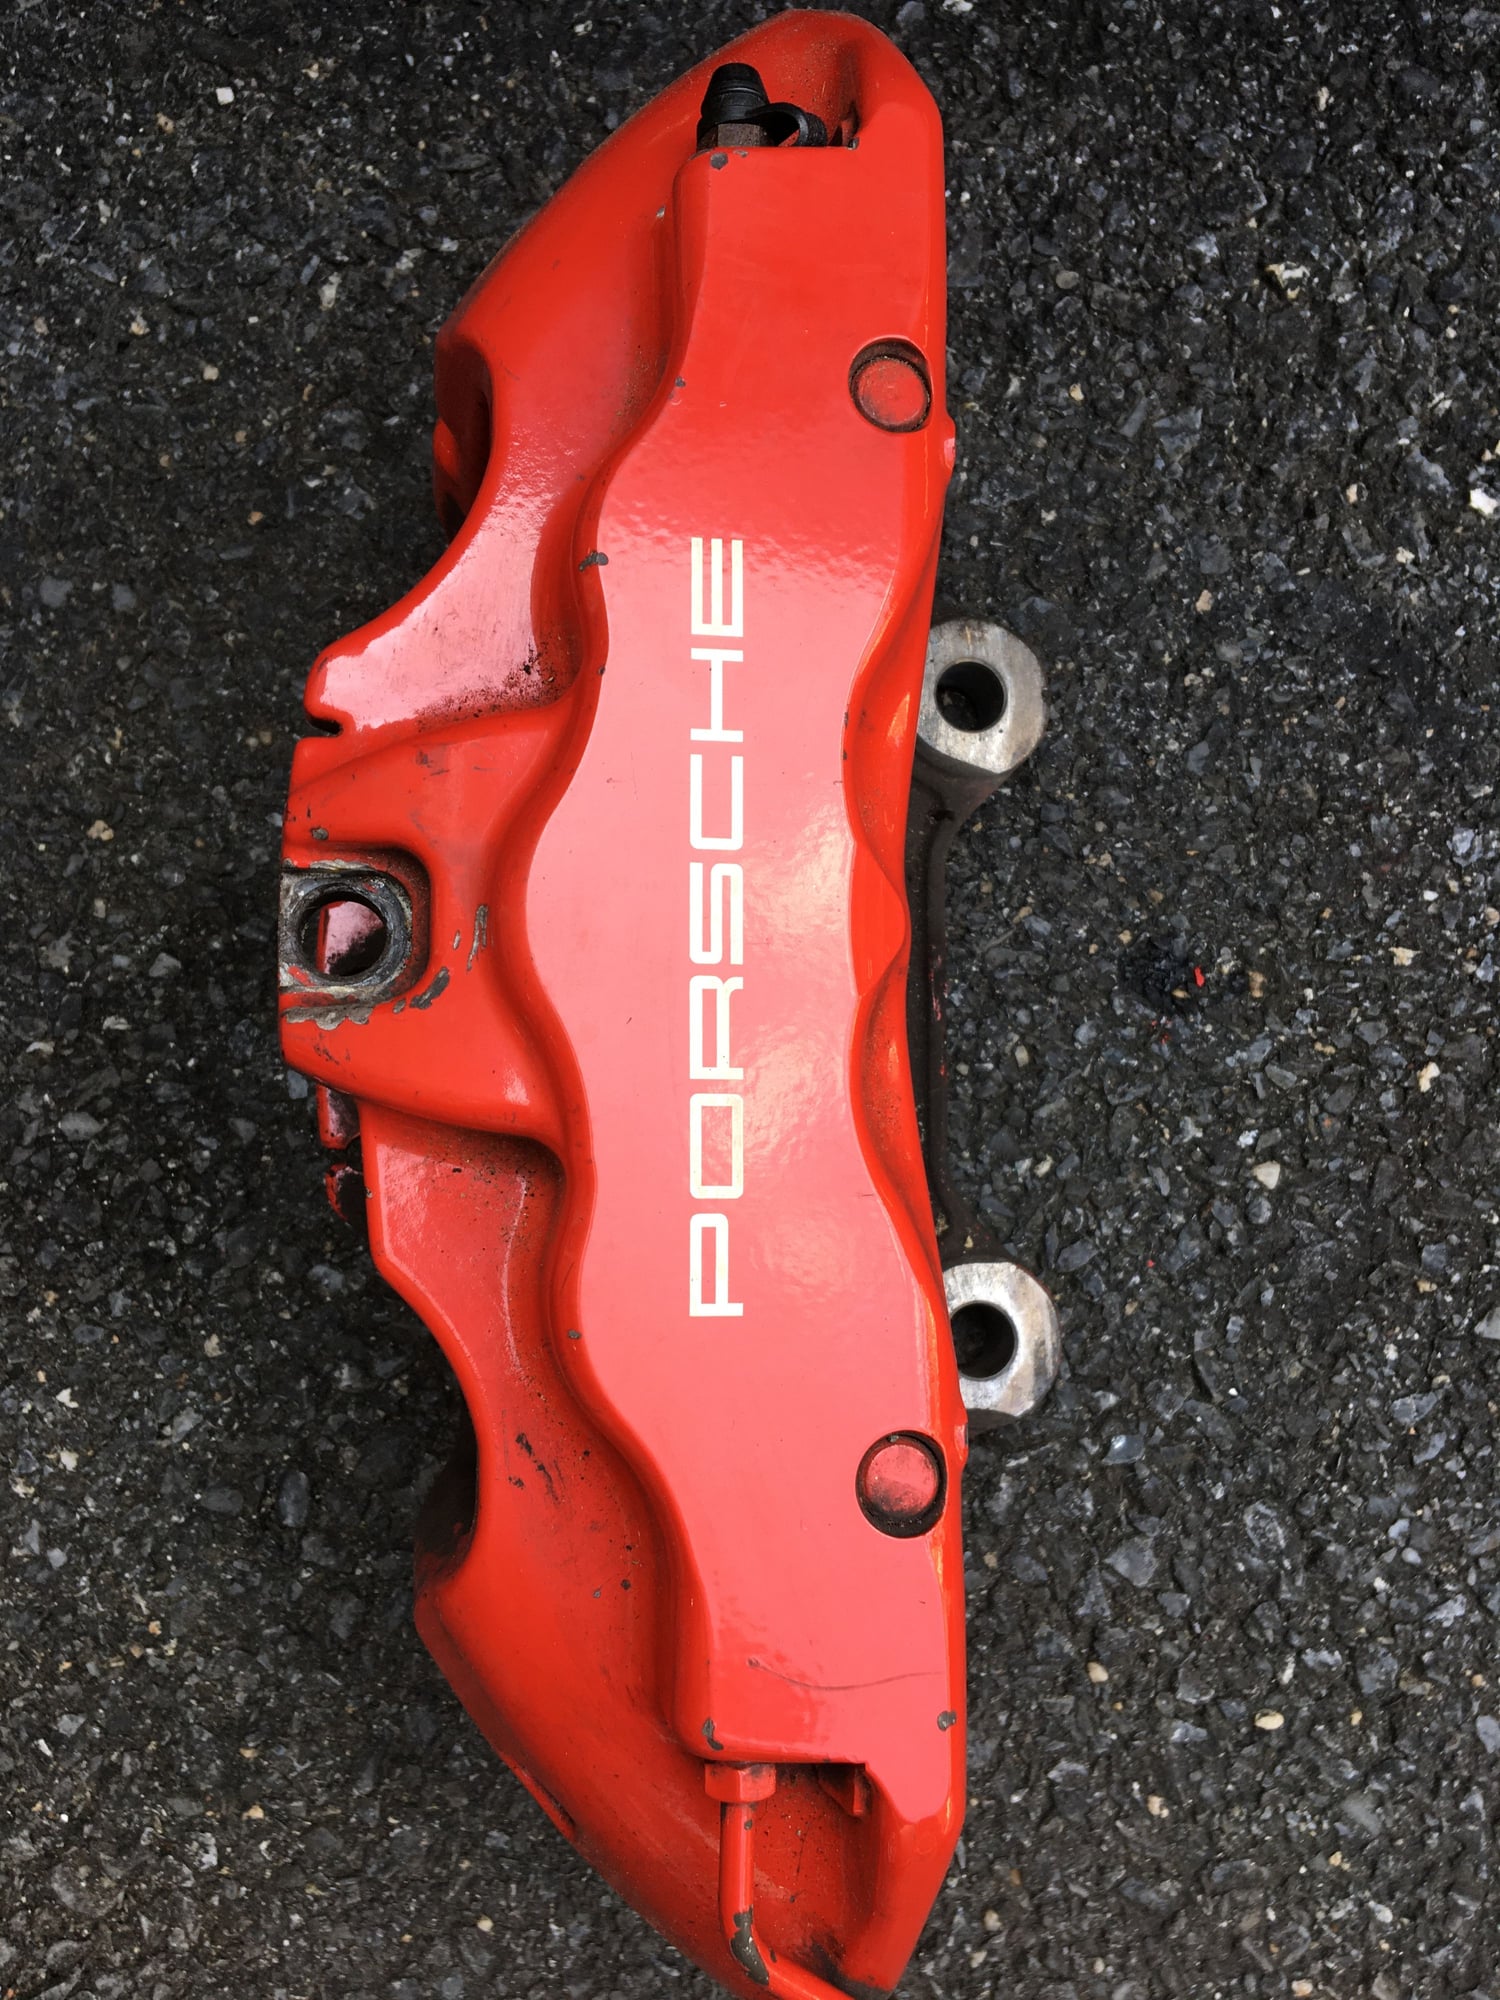 2009 Porsche Cayenne Turbo S Calipers front and rear